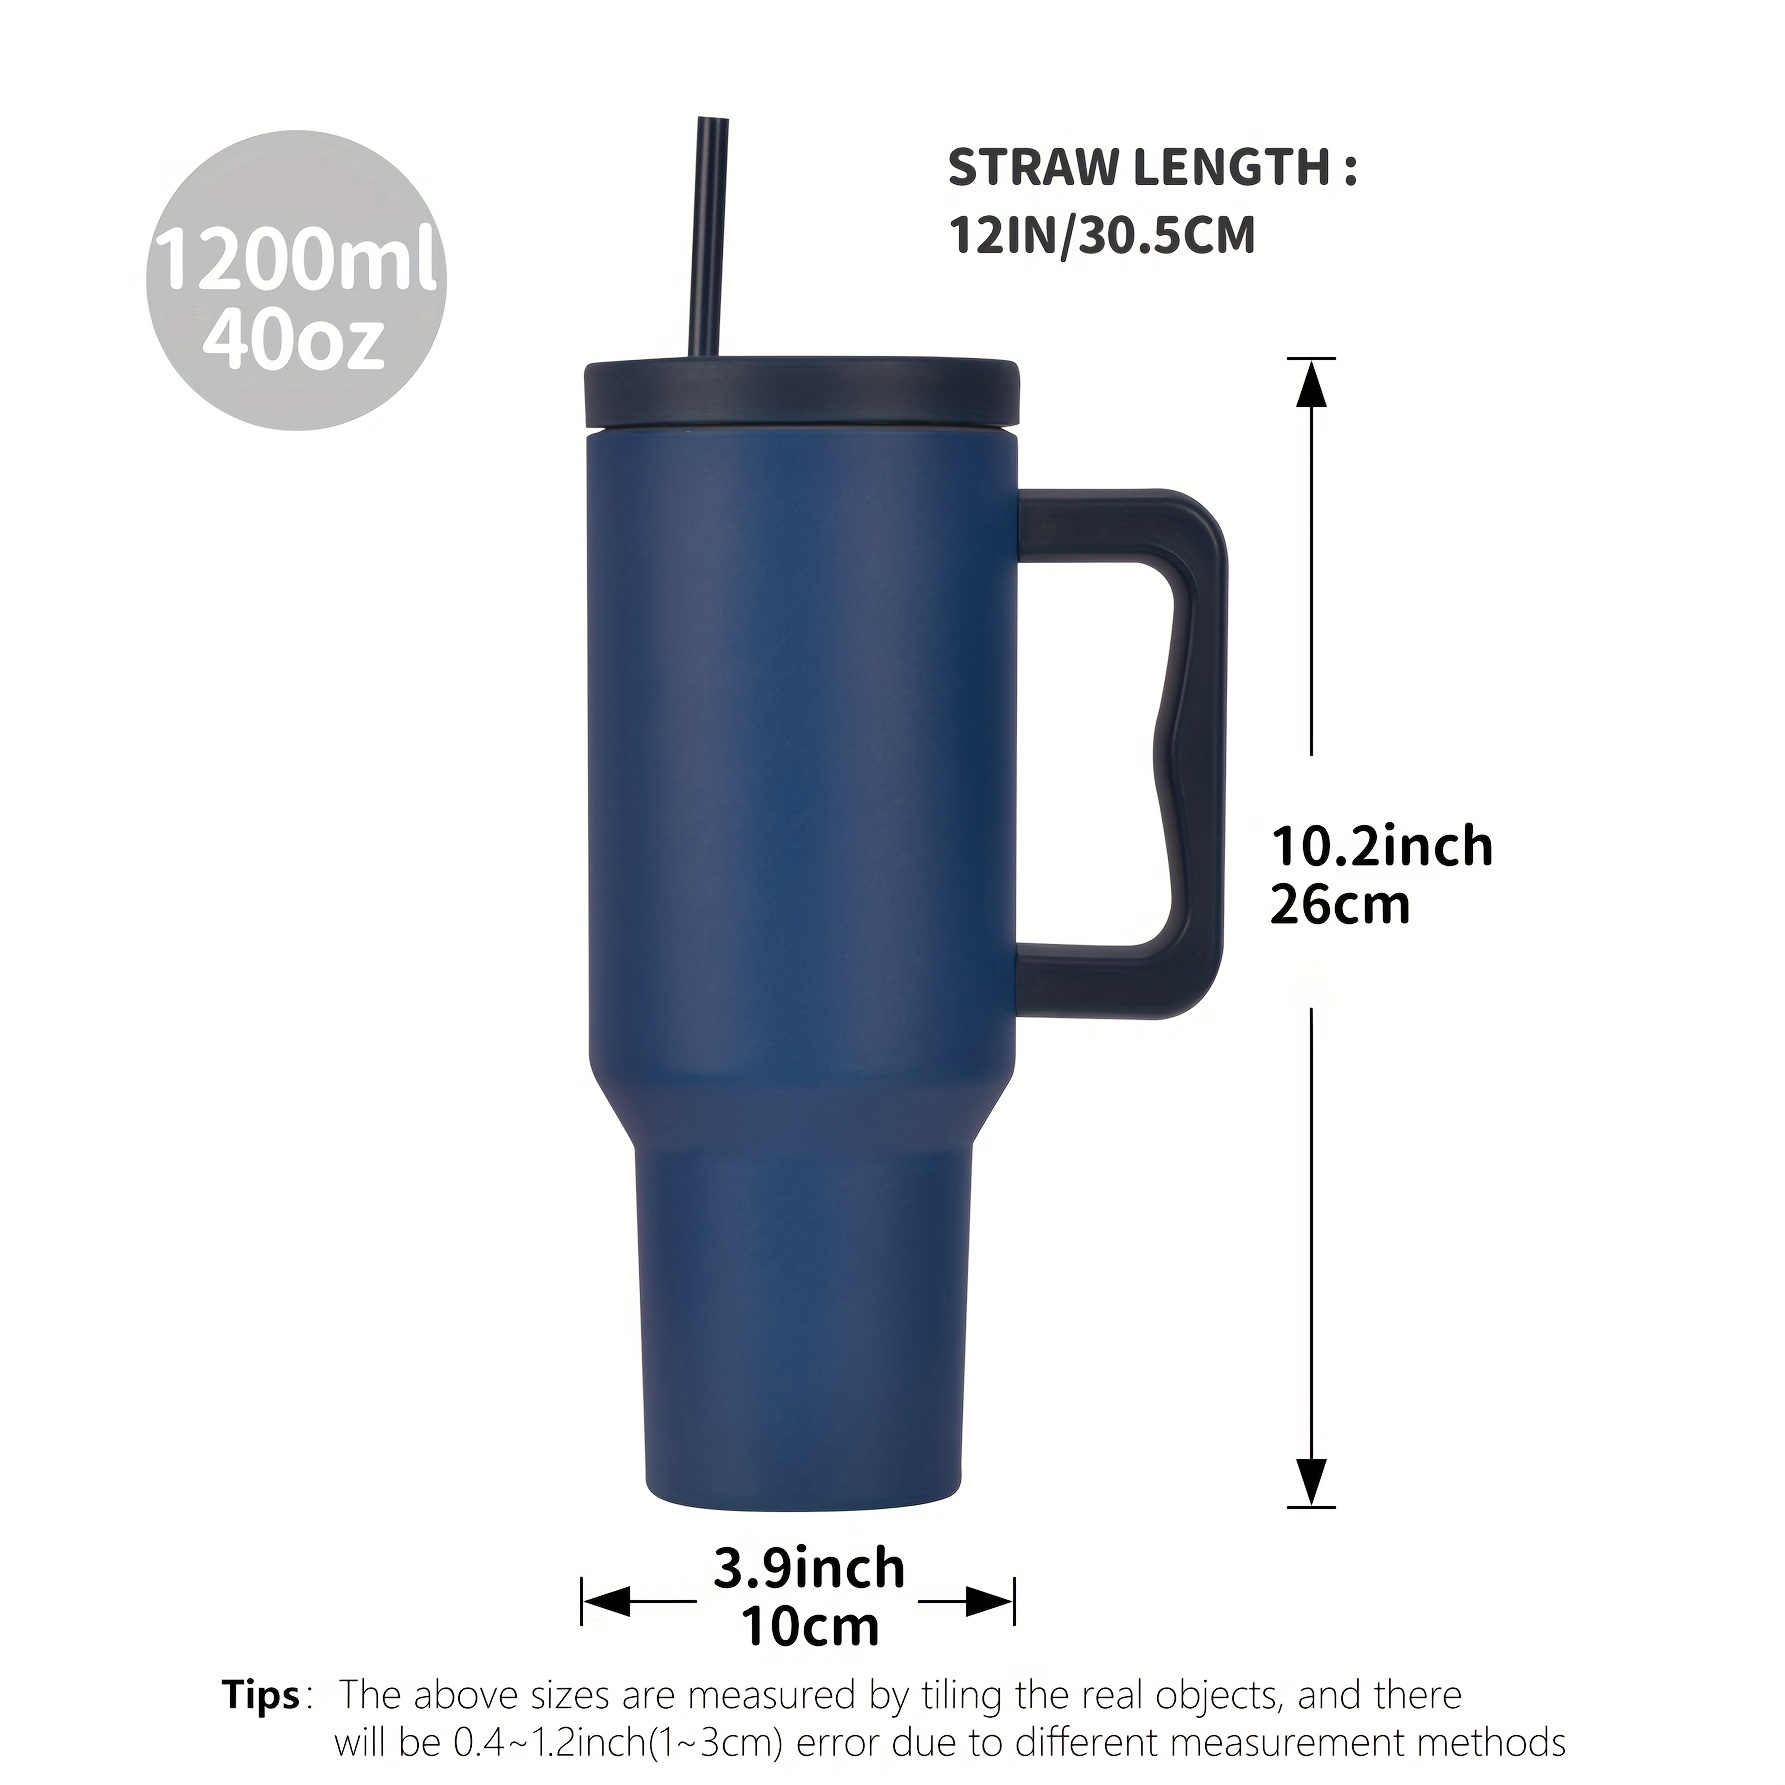 1200ml/40oz Handle & Straw Cold Drink Cup Stainless Steel Leakproof Tumbler  With Handle, Dustproof Lid & Reusable Straw For Car, Traveling, Camping,  Outdoor Activities